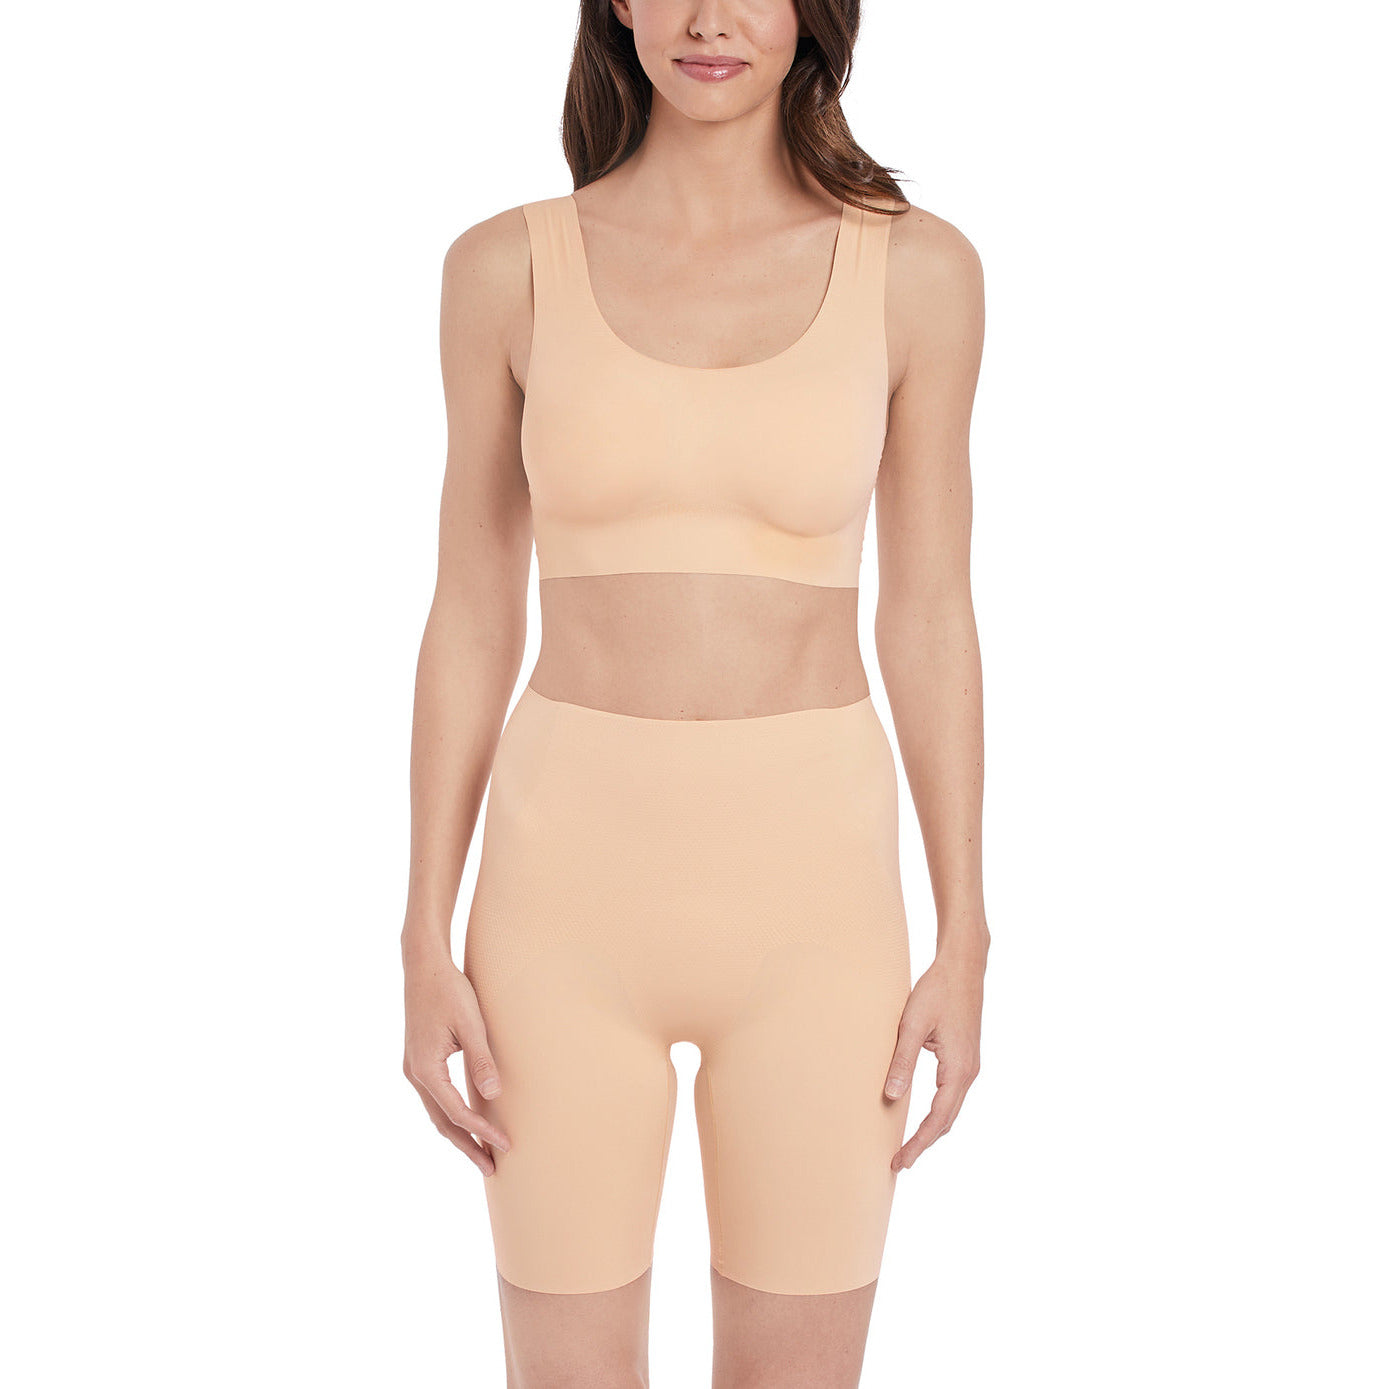 ATIR Shapewear - The ATIR Toner -Before and After and the Toner